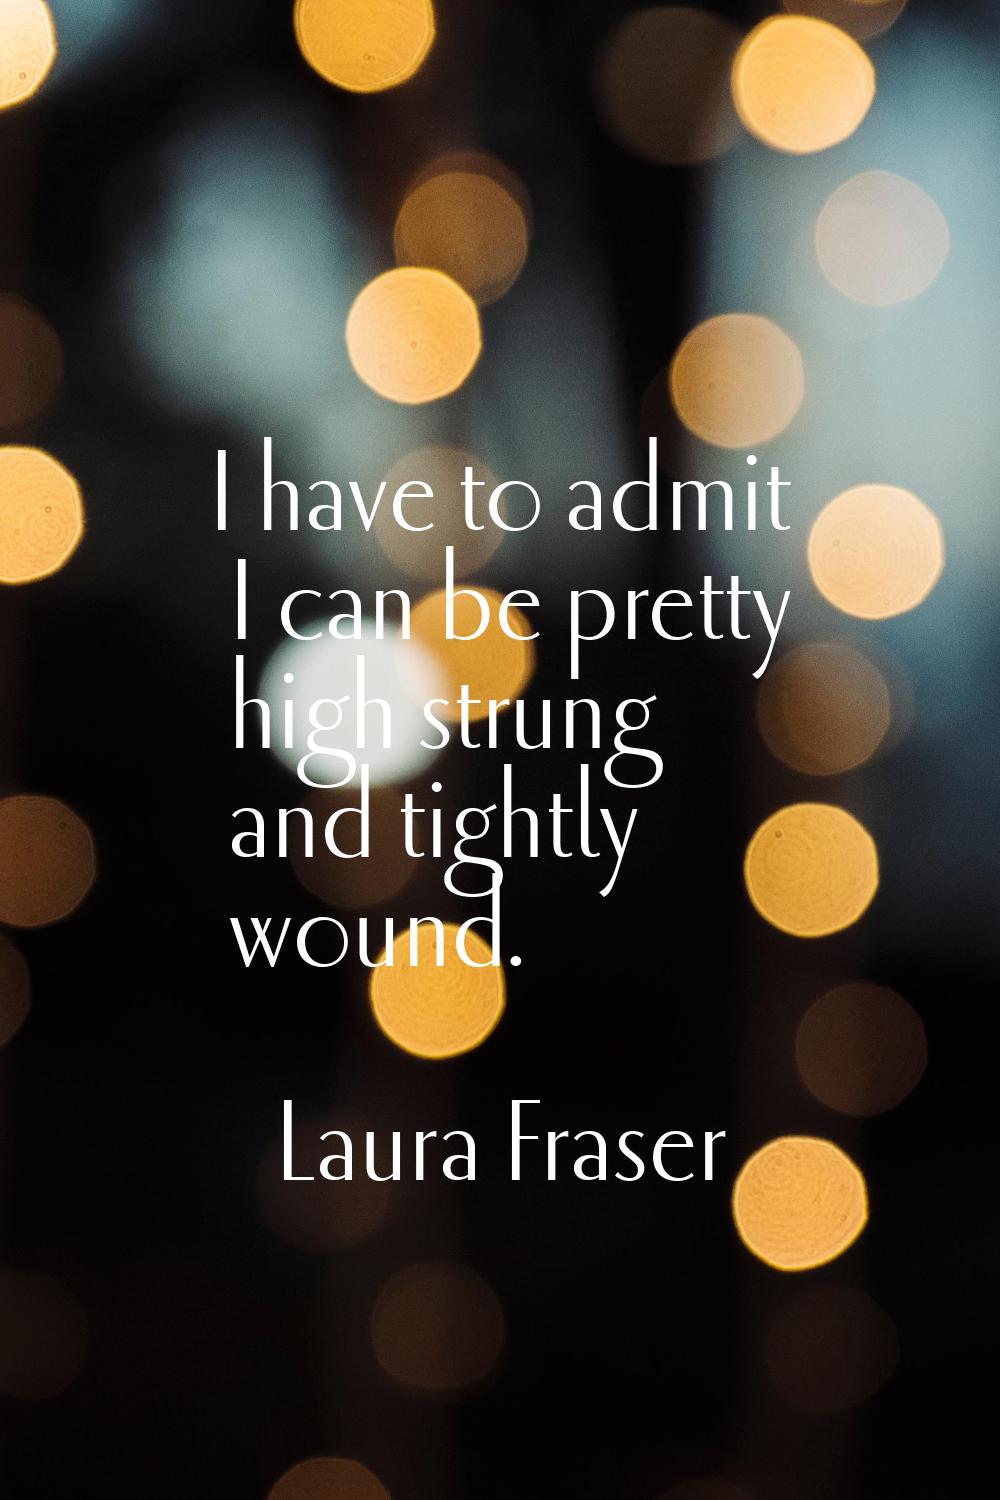 I have to admit I can be pretty high strung and tightly wound.